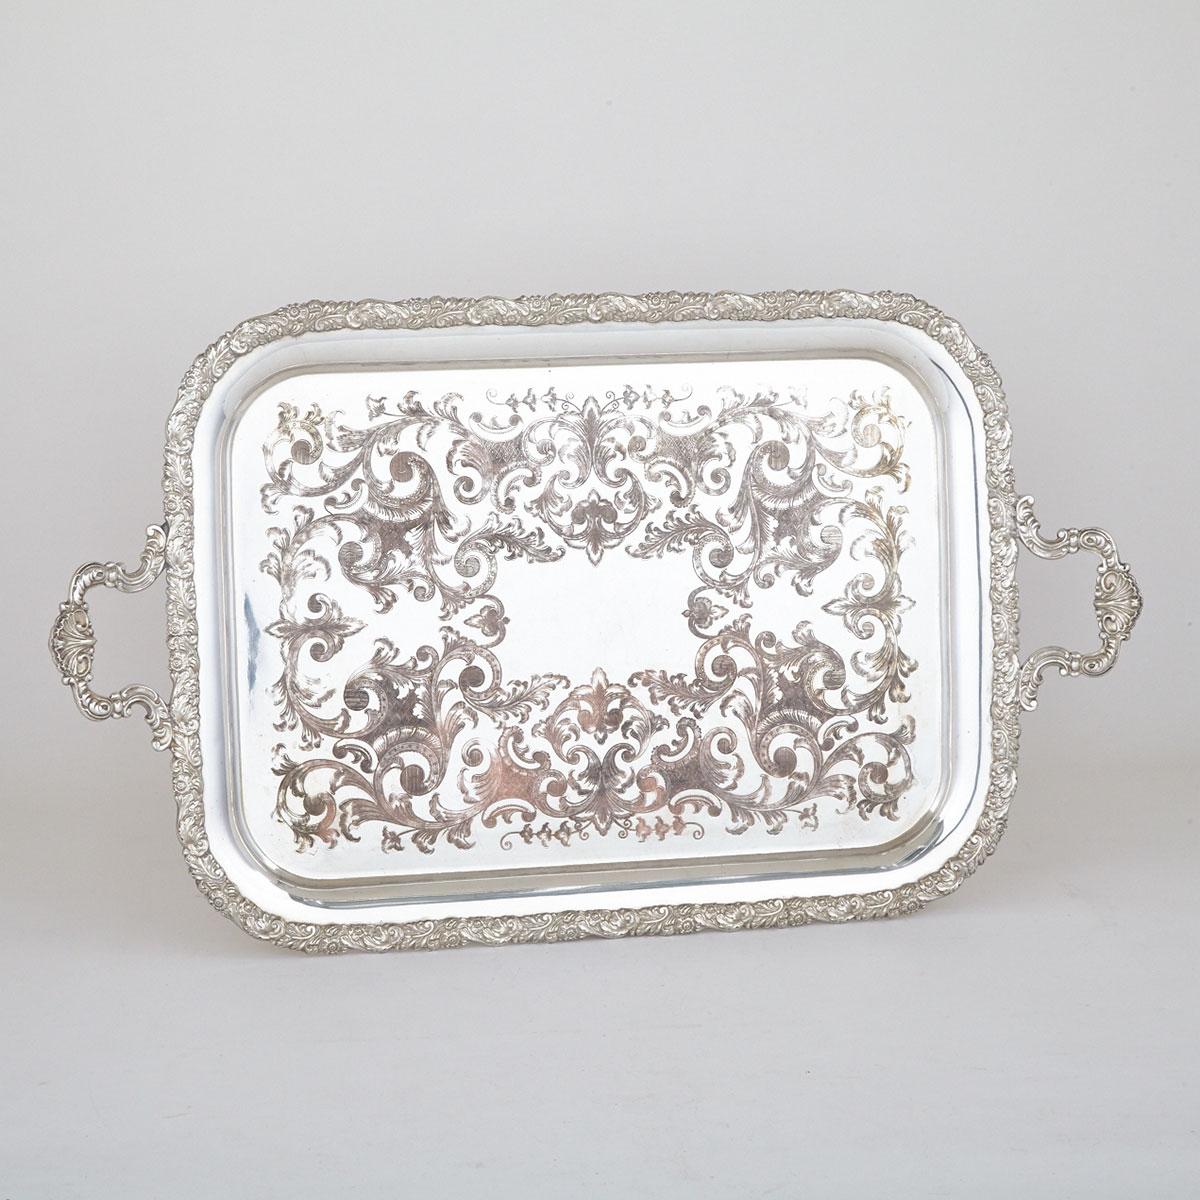 Victorian Silver Plated Two-Handled Rectangular Serving Tray, mid-19th century